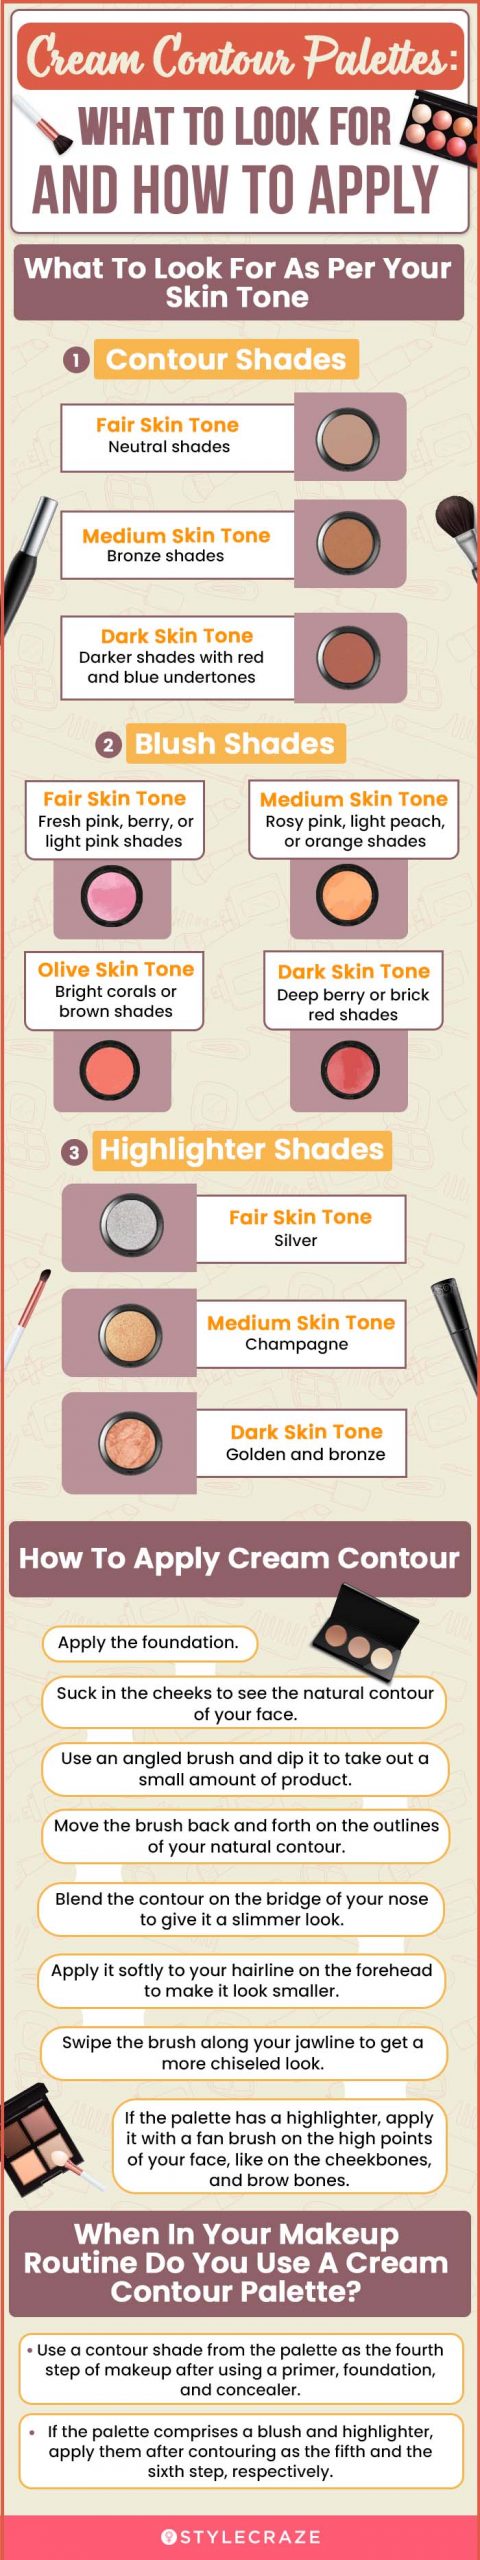 Cream Contour Palettes: What To Look For And How To Apply